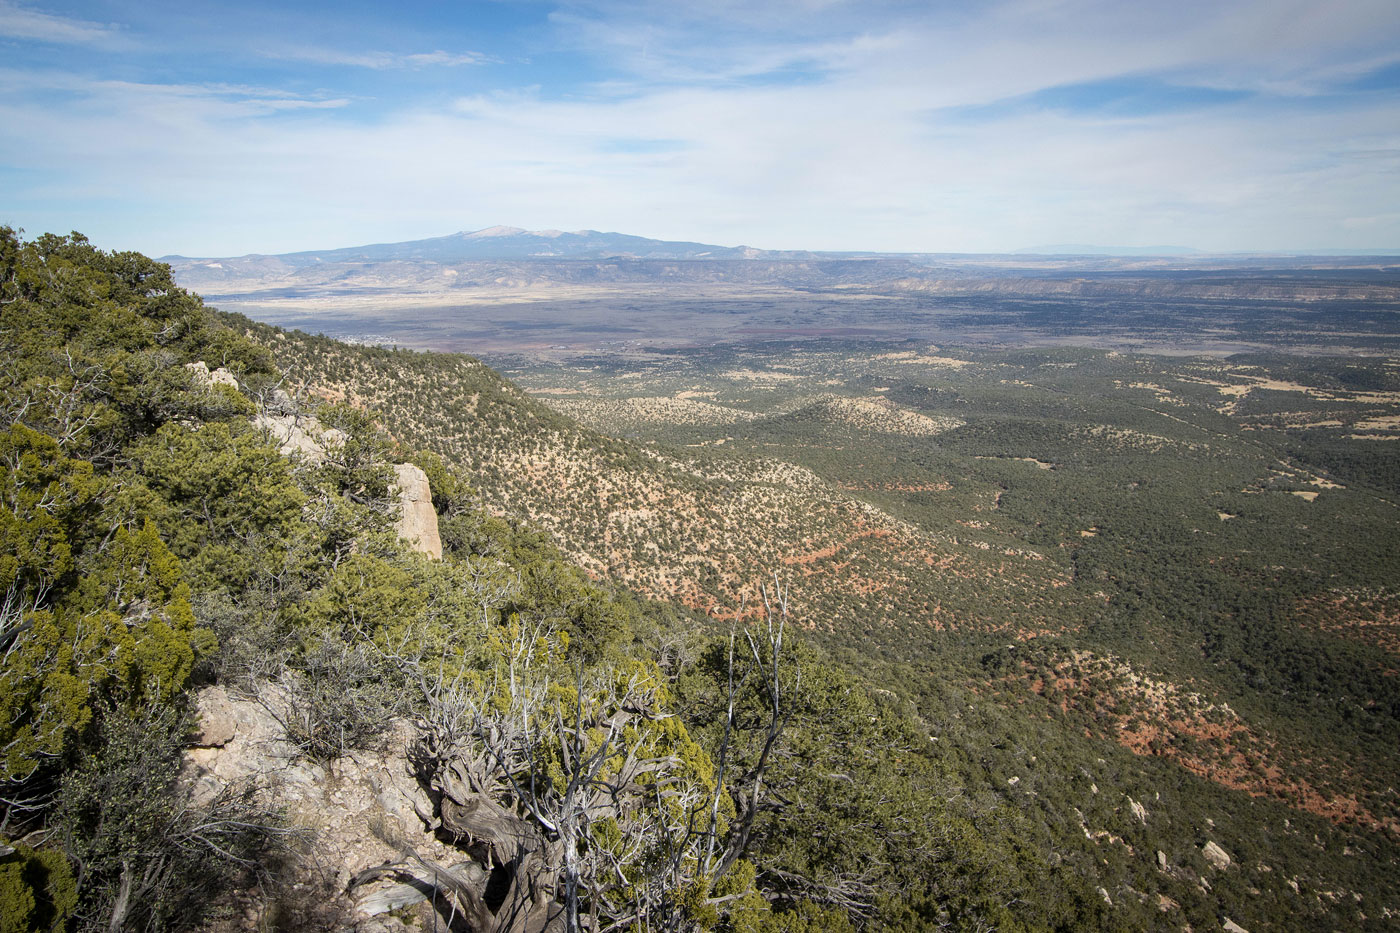 Hike Gallo Peak in Cibola National Forest, New Mexico - Stav is Lost